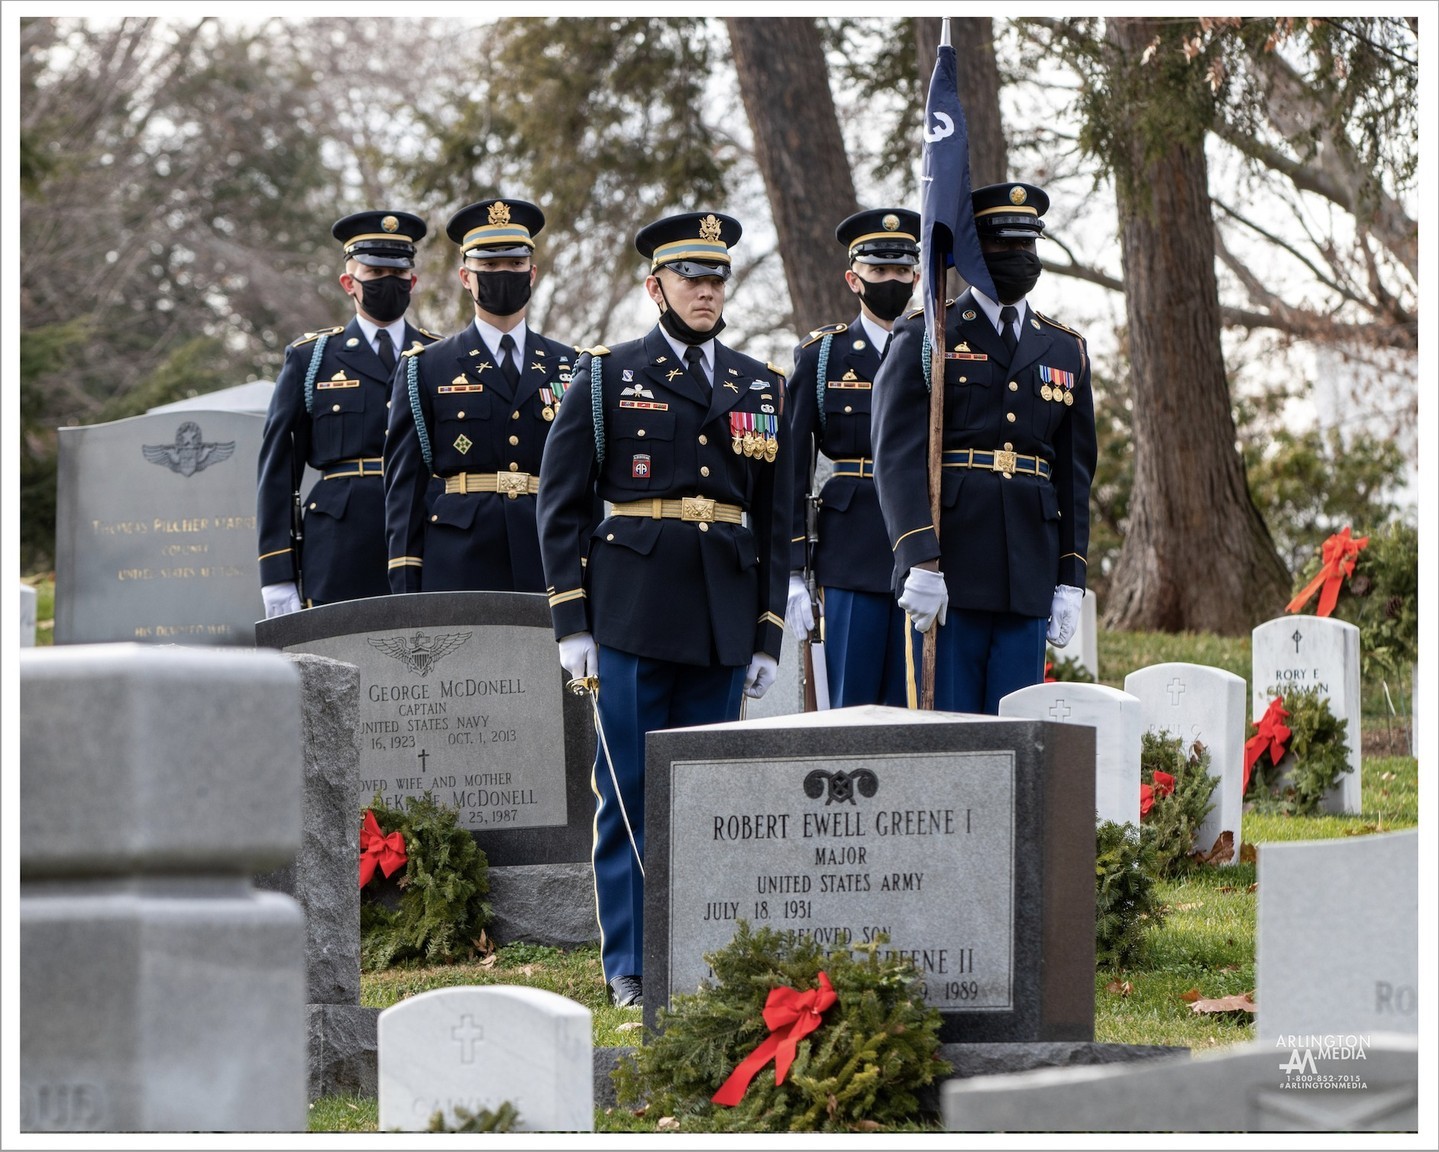 An escort commander and his platoon captured during a mission in Arlington National Cemetery.

PC: @arlingtonmedia